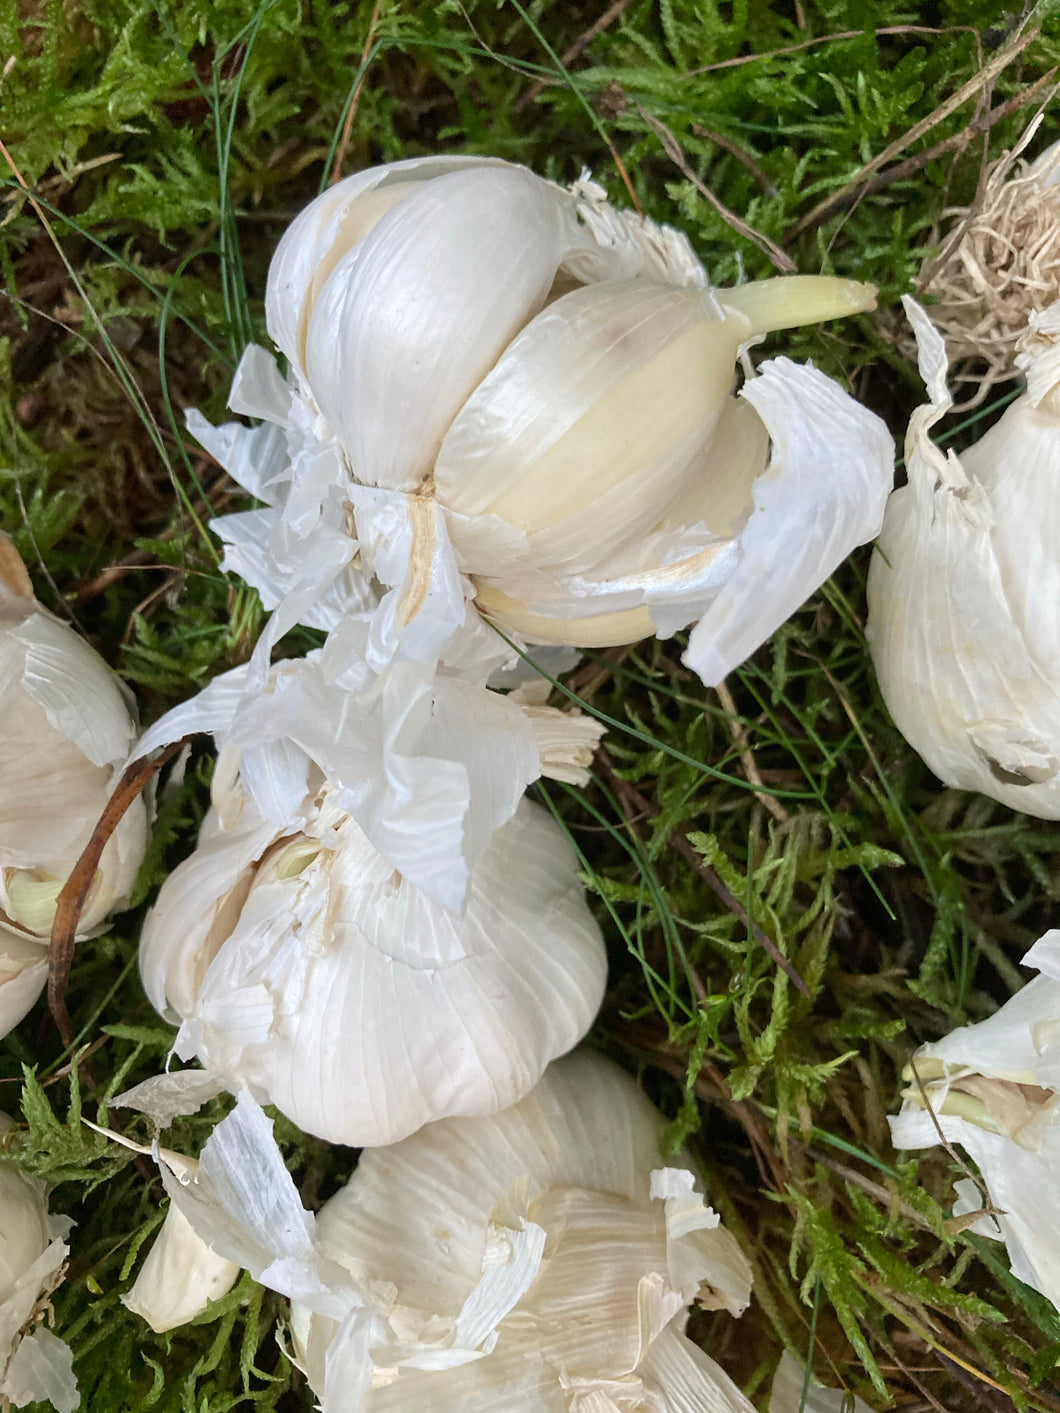 3 bulbs of Garlic for Grow-Your-Own Includes Postage